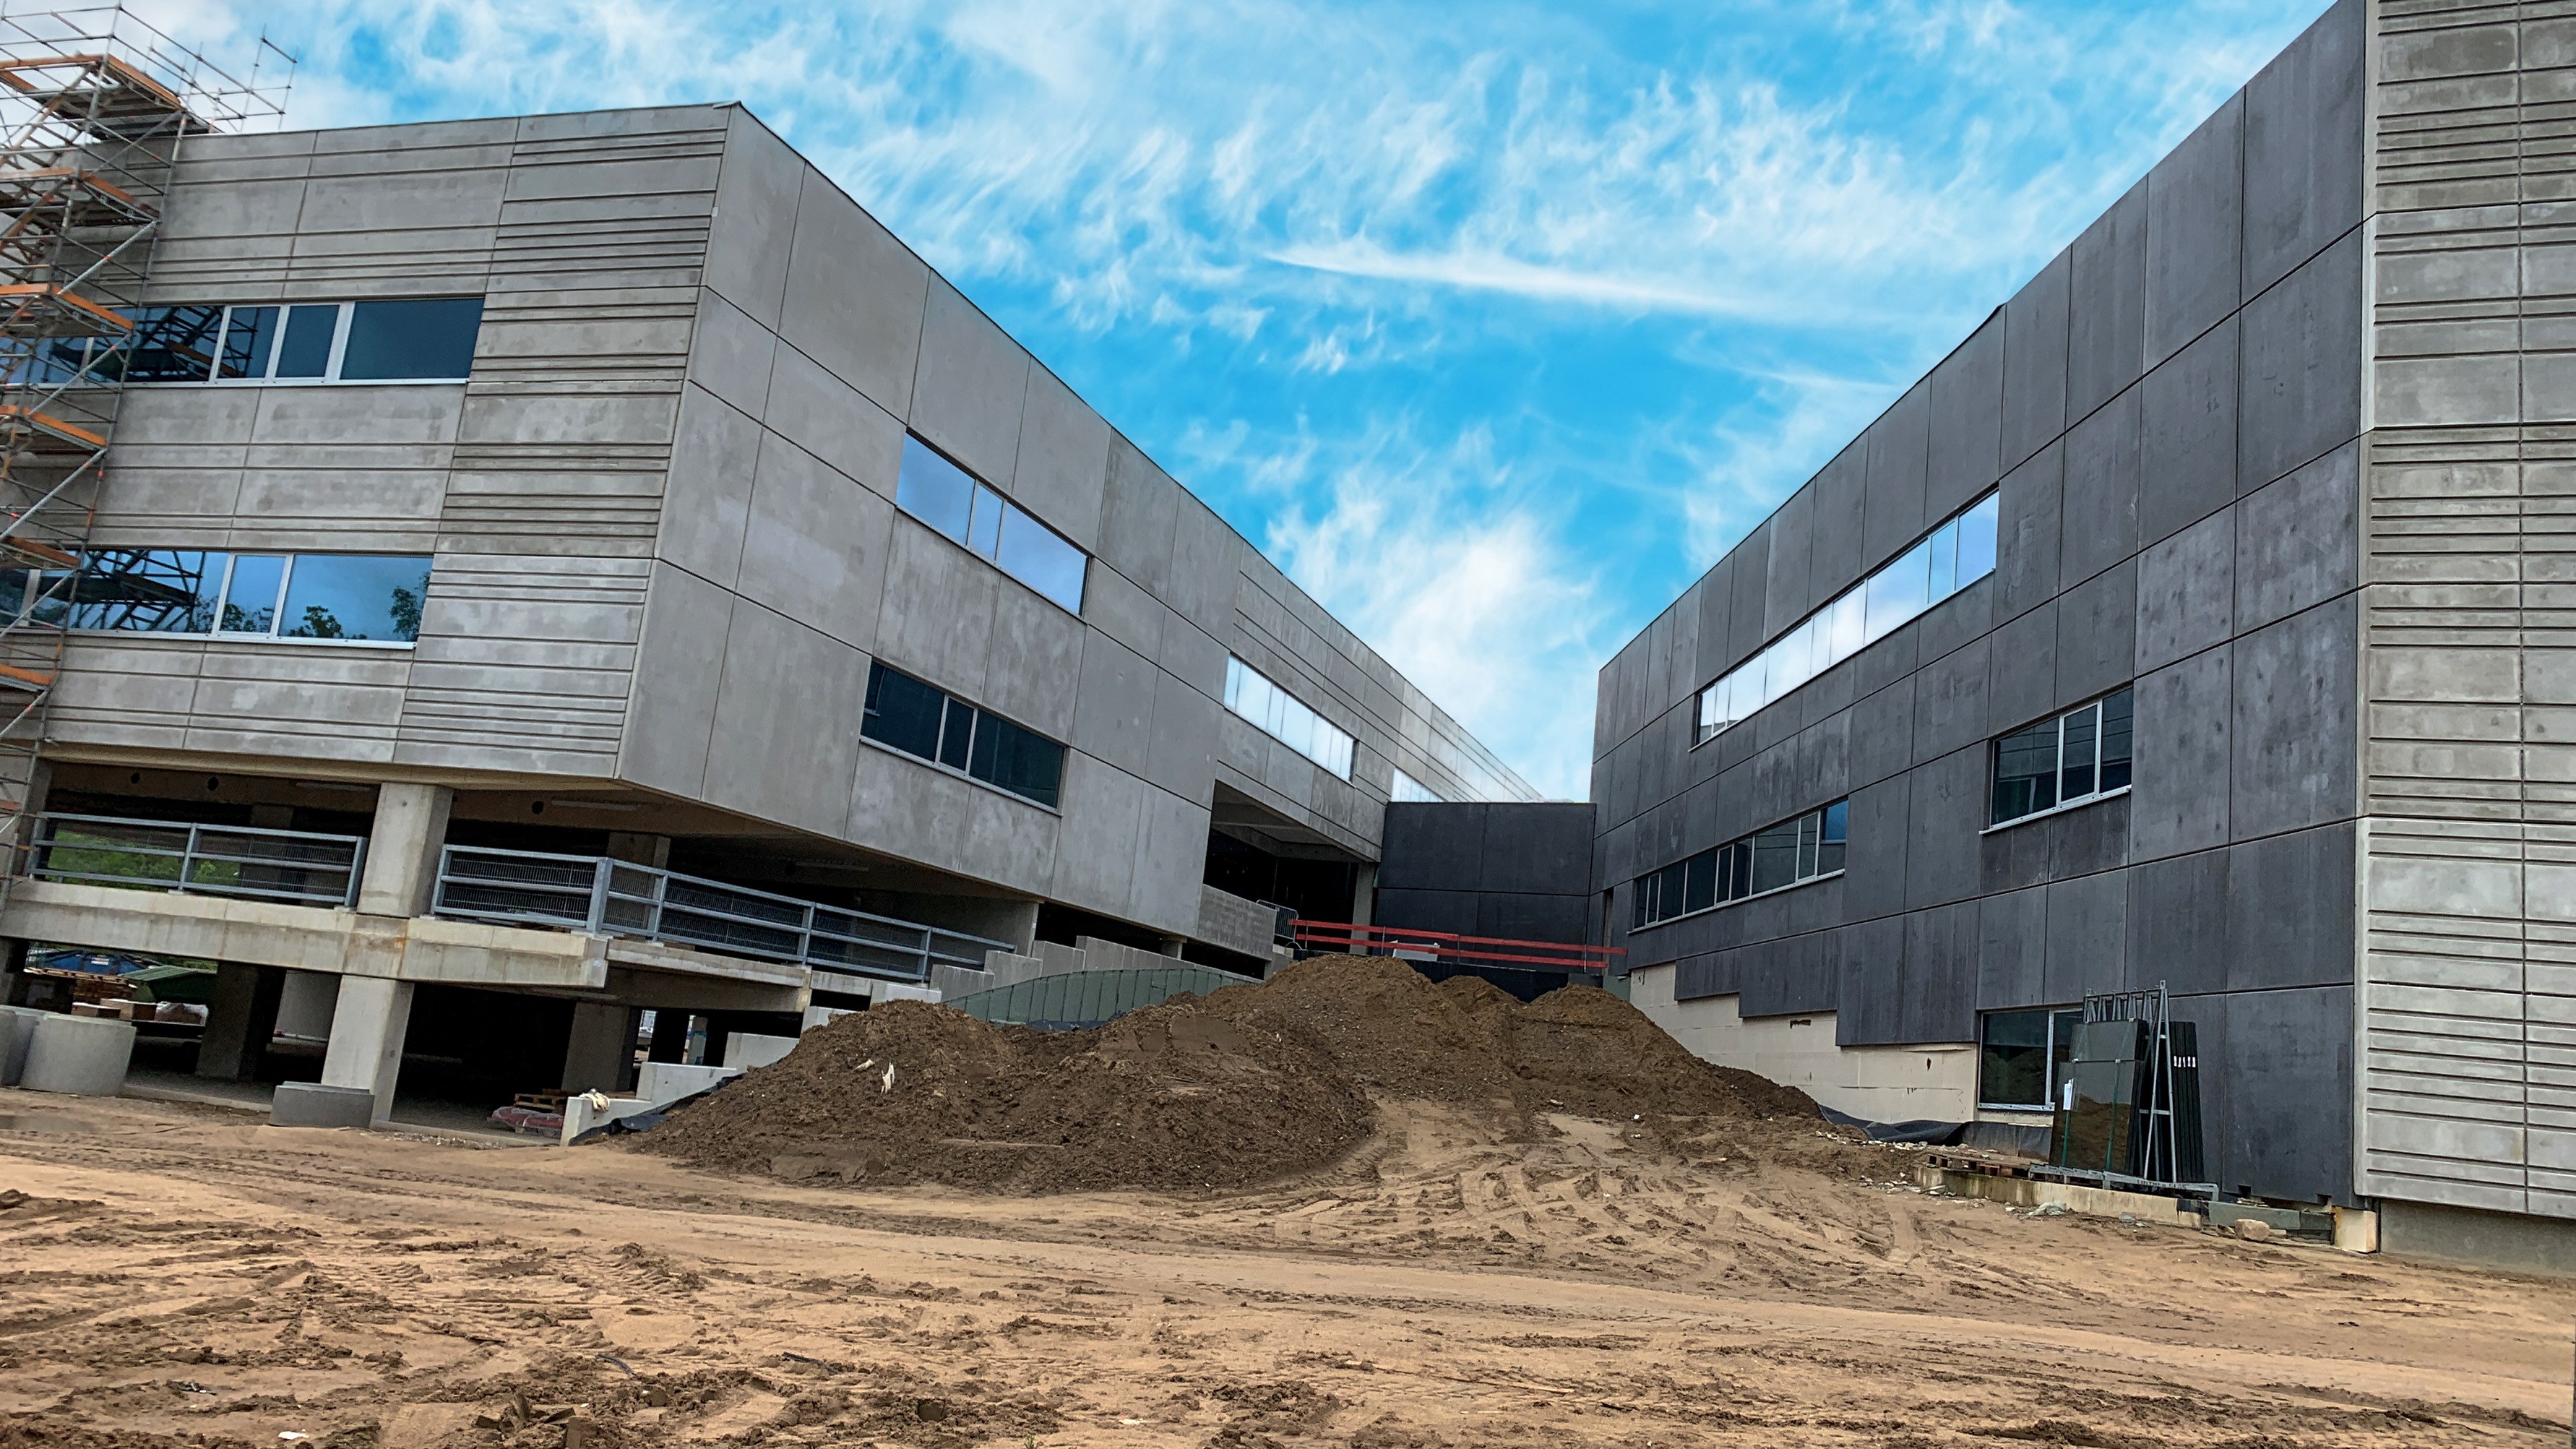 Faurecia headquarters: North entrance being finalized